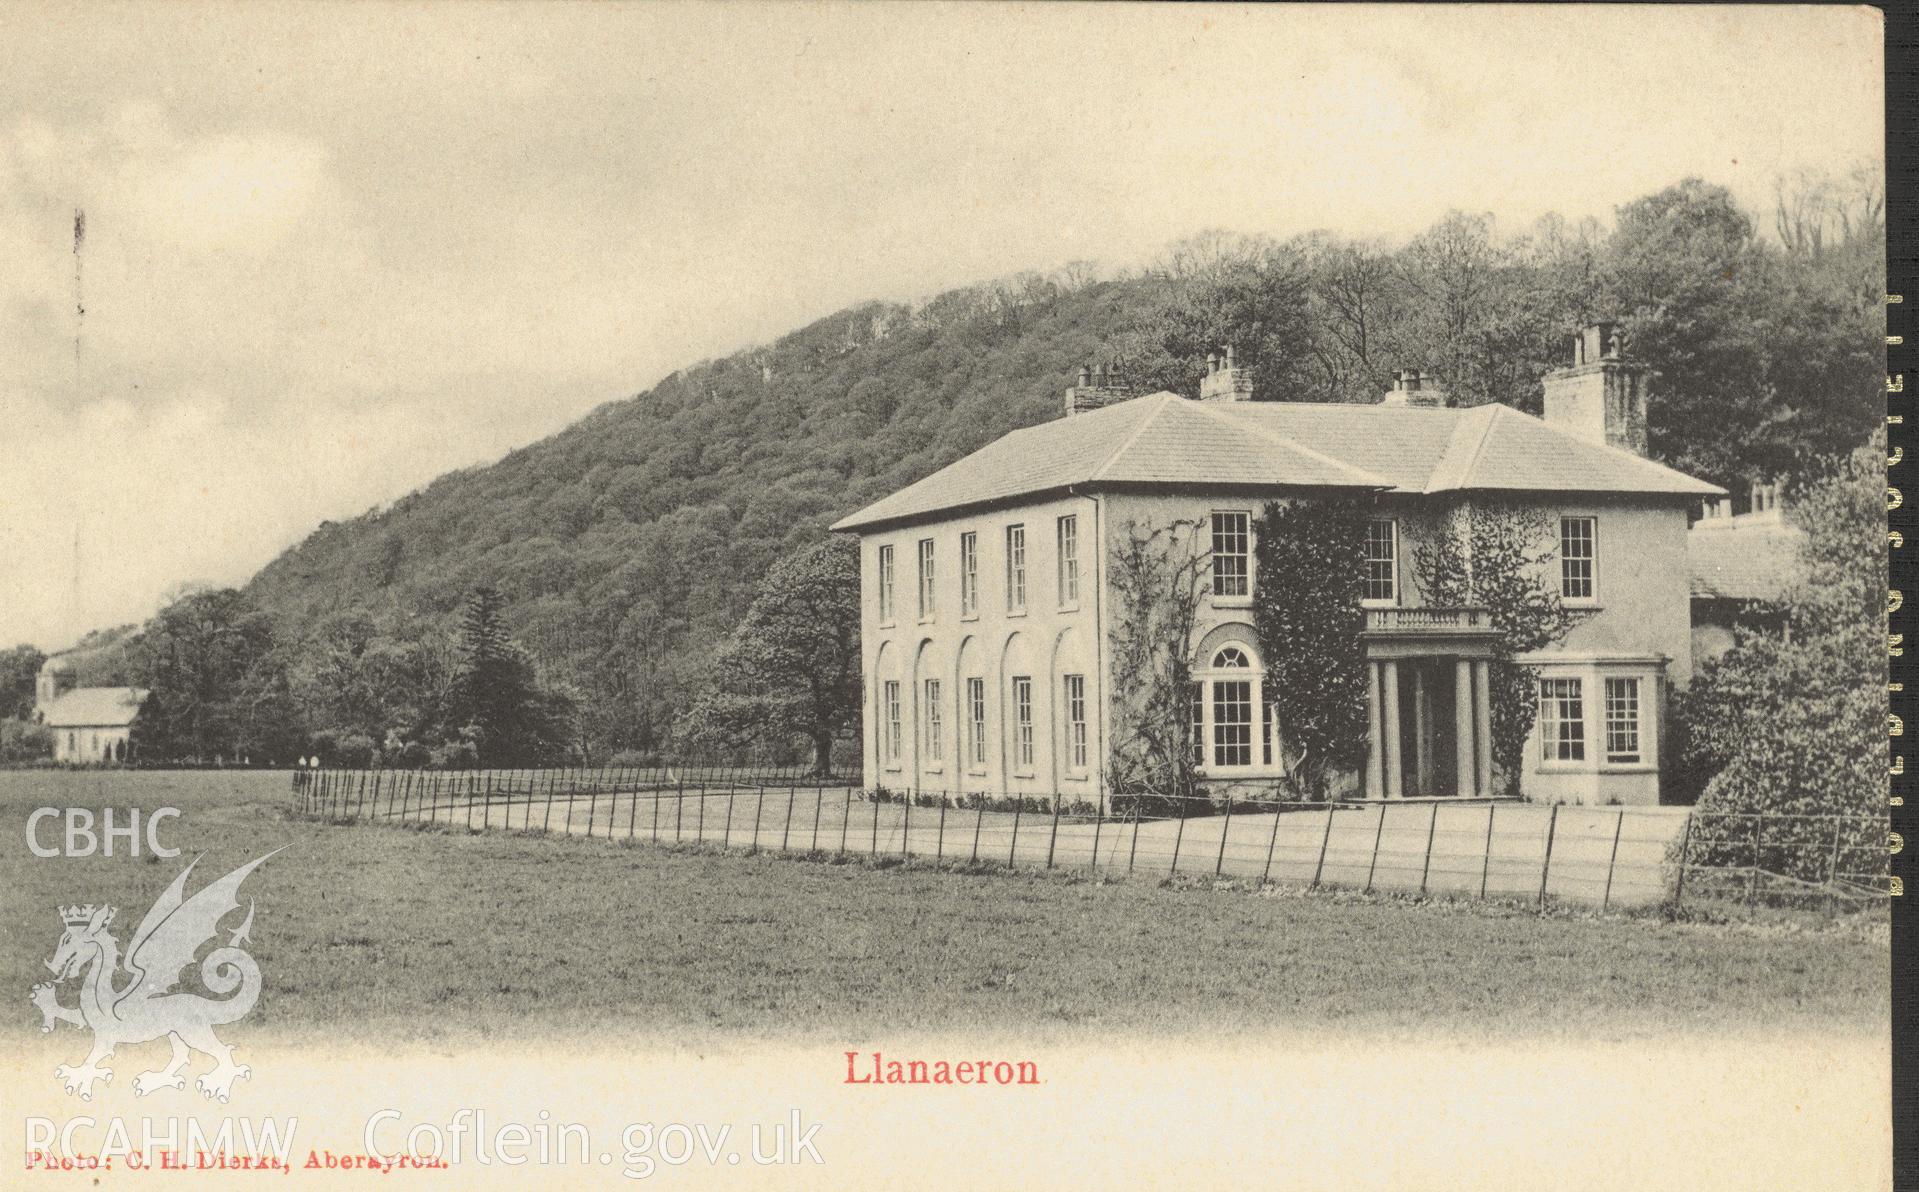 Digitised postcard image of Llanerchaeron House, C.H. Dierks, Aberayron. Produced by Parks and Gardens Data Services, from an original item in the Peter Davis Collection at Parks and Gardens UK. We hold only web-resolution images of this collection, suitable for viewing on screen and for research purposes only. We do not hold the original images, or publication quality scans.